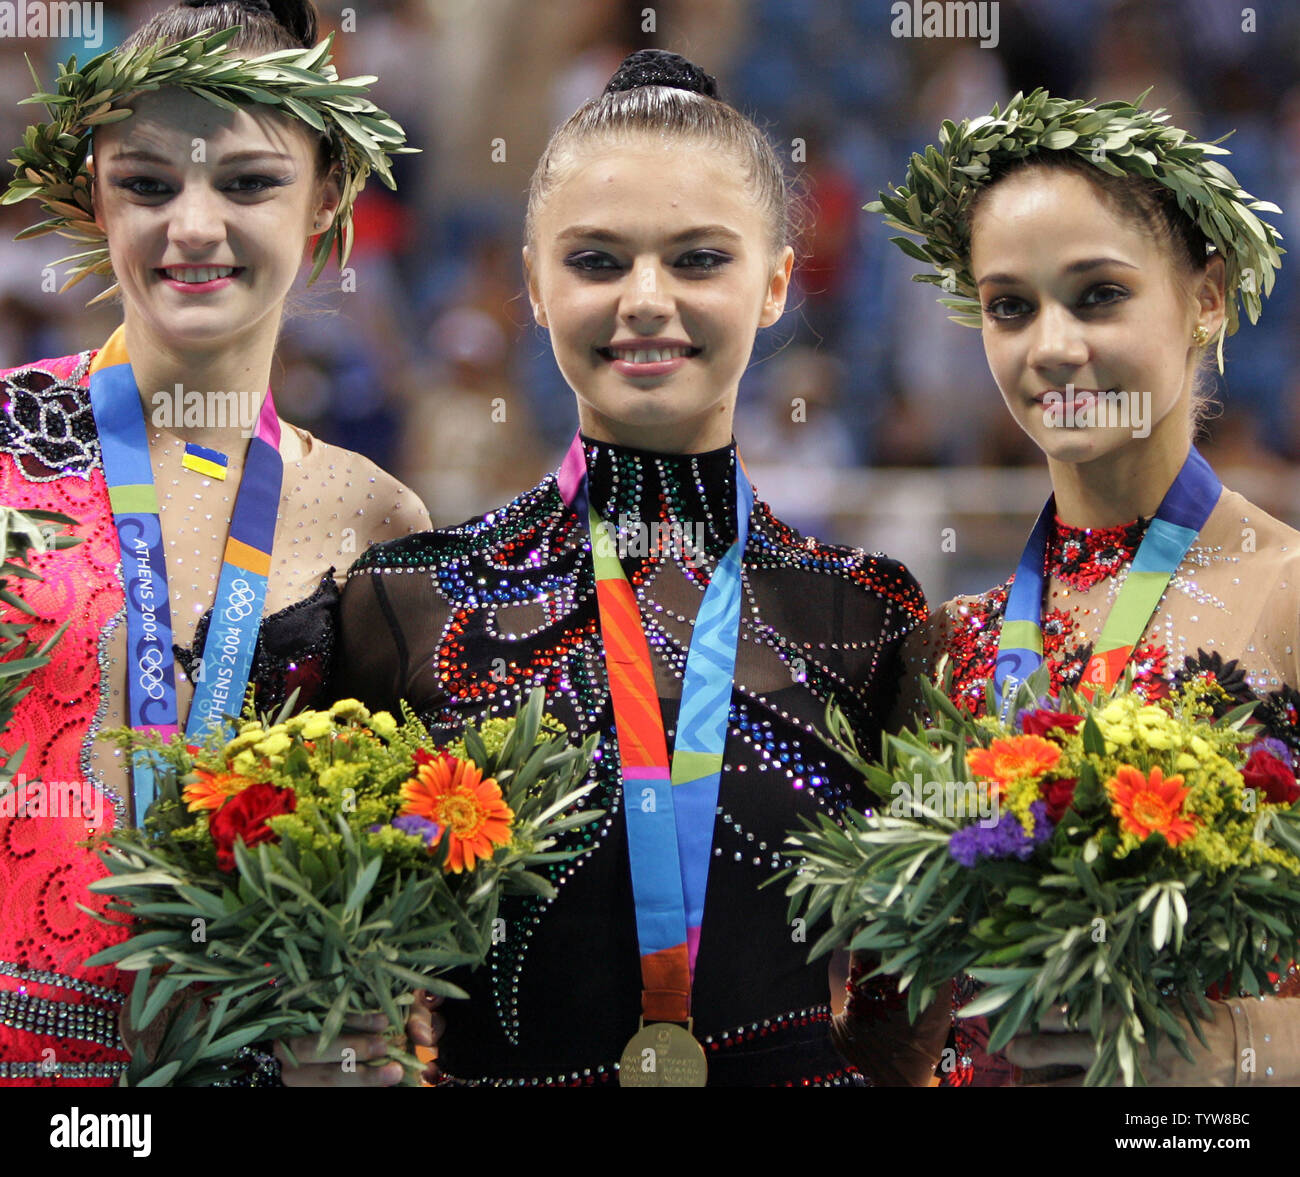 Medallists in the Olympic rhythmic gymnastics individual all around competition smile at Galatsi Hall in Athens on August 29, 2004. From left, Anna Bessonova of Ukraine, bronze. 106.700 points; Alina Kabaeva of Russia, gold, 108.400 points; and Irina Tchachina of Russia, silver, 107.325 points. (UPI Photo/Grace Chiu) Stock Photo